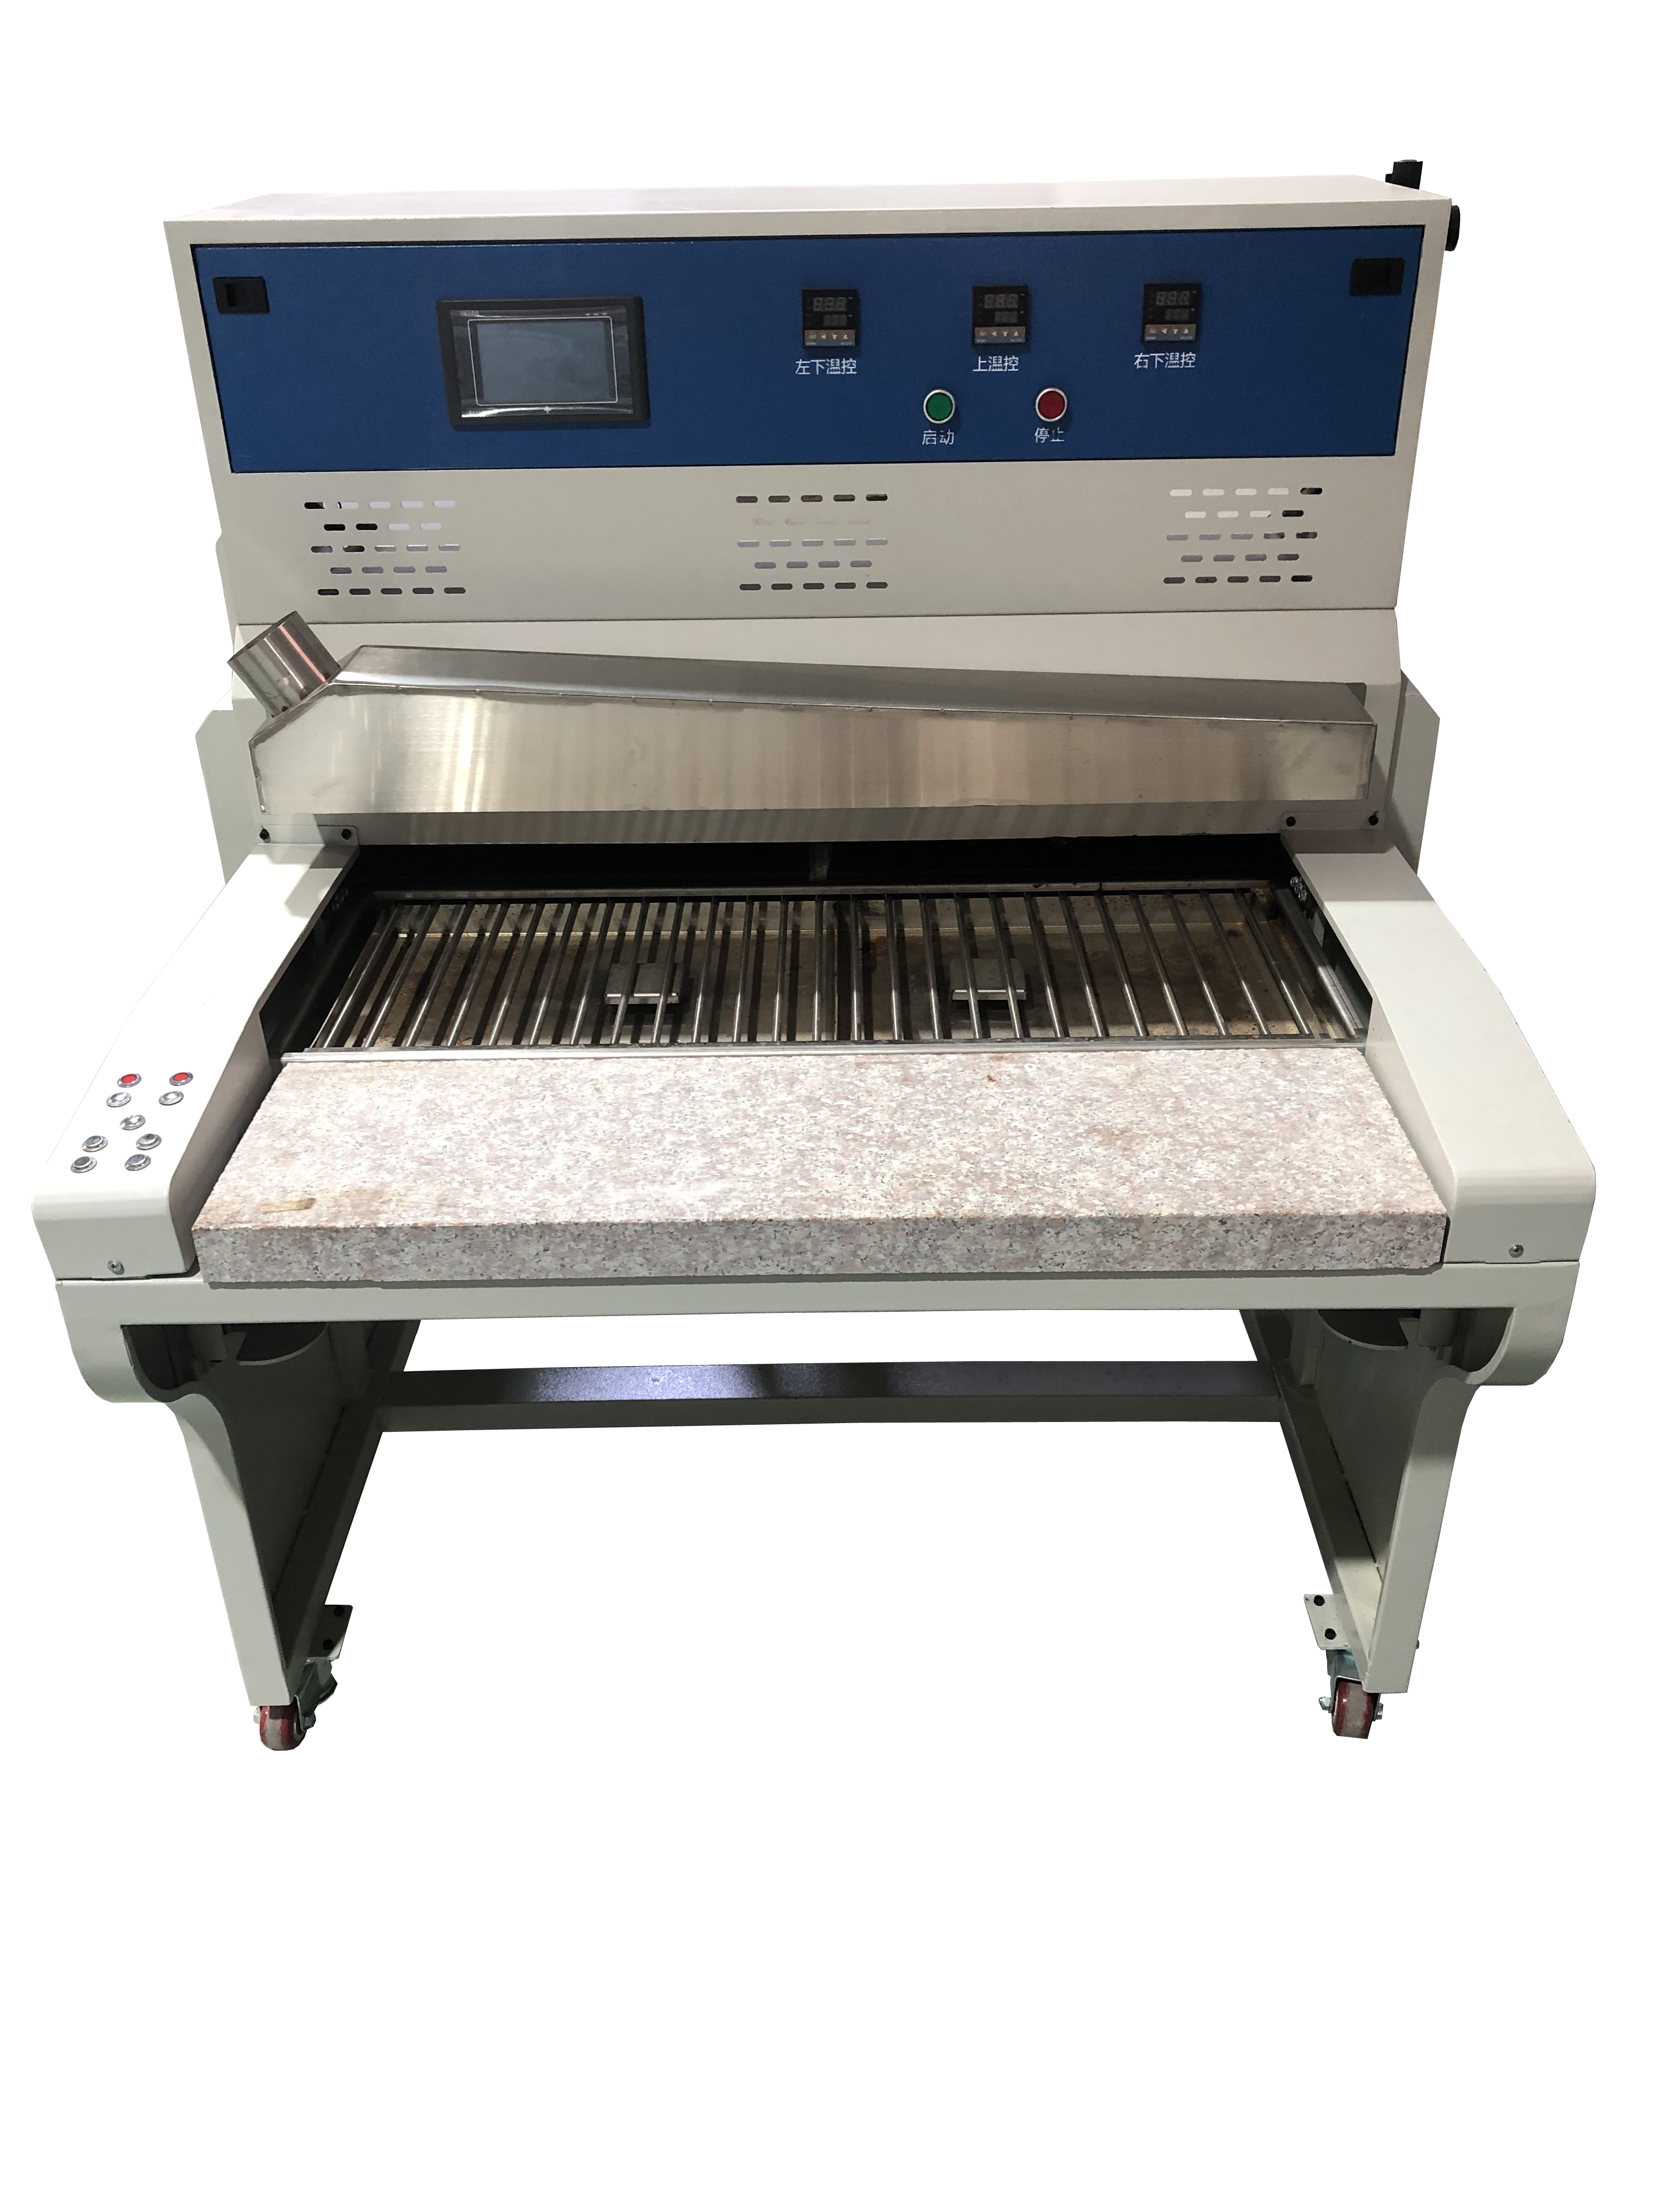 Oven for Plastic Dropping Machine